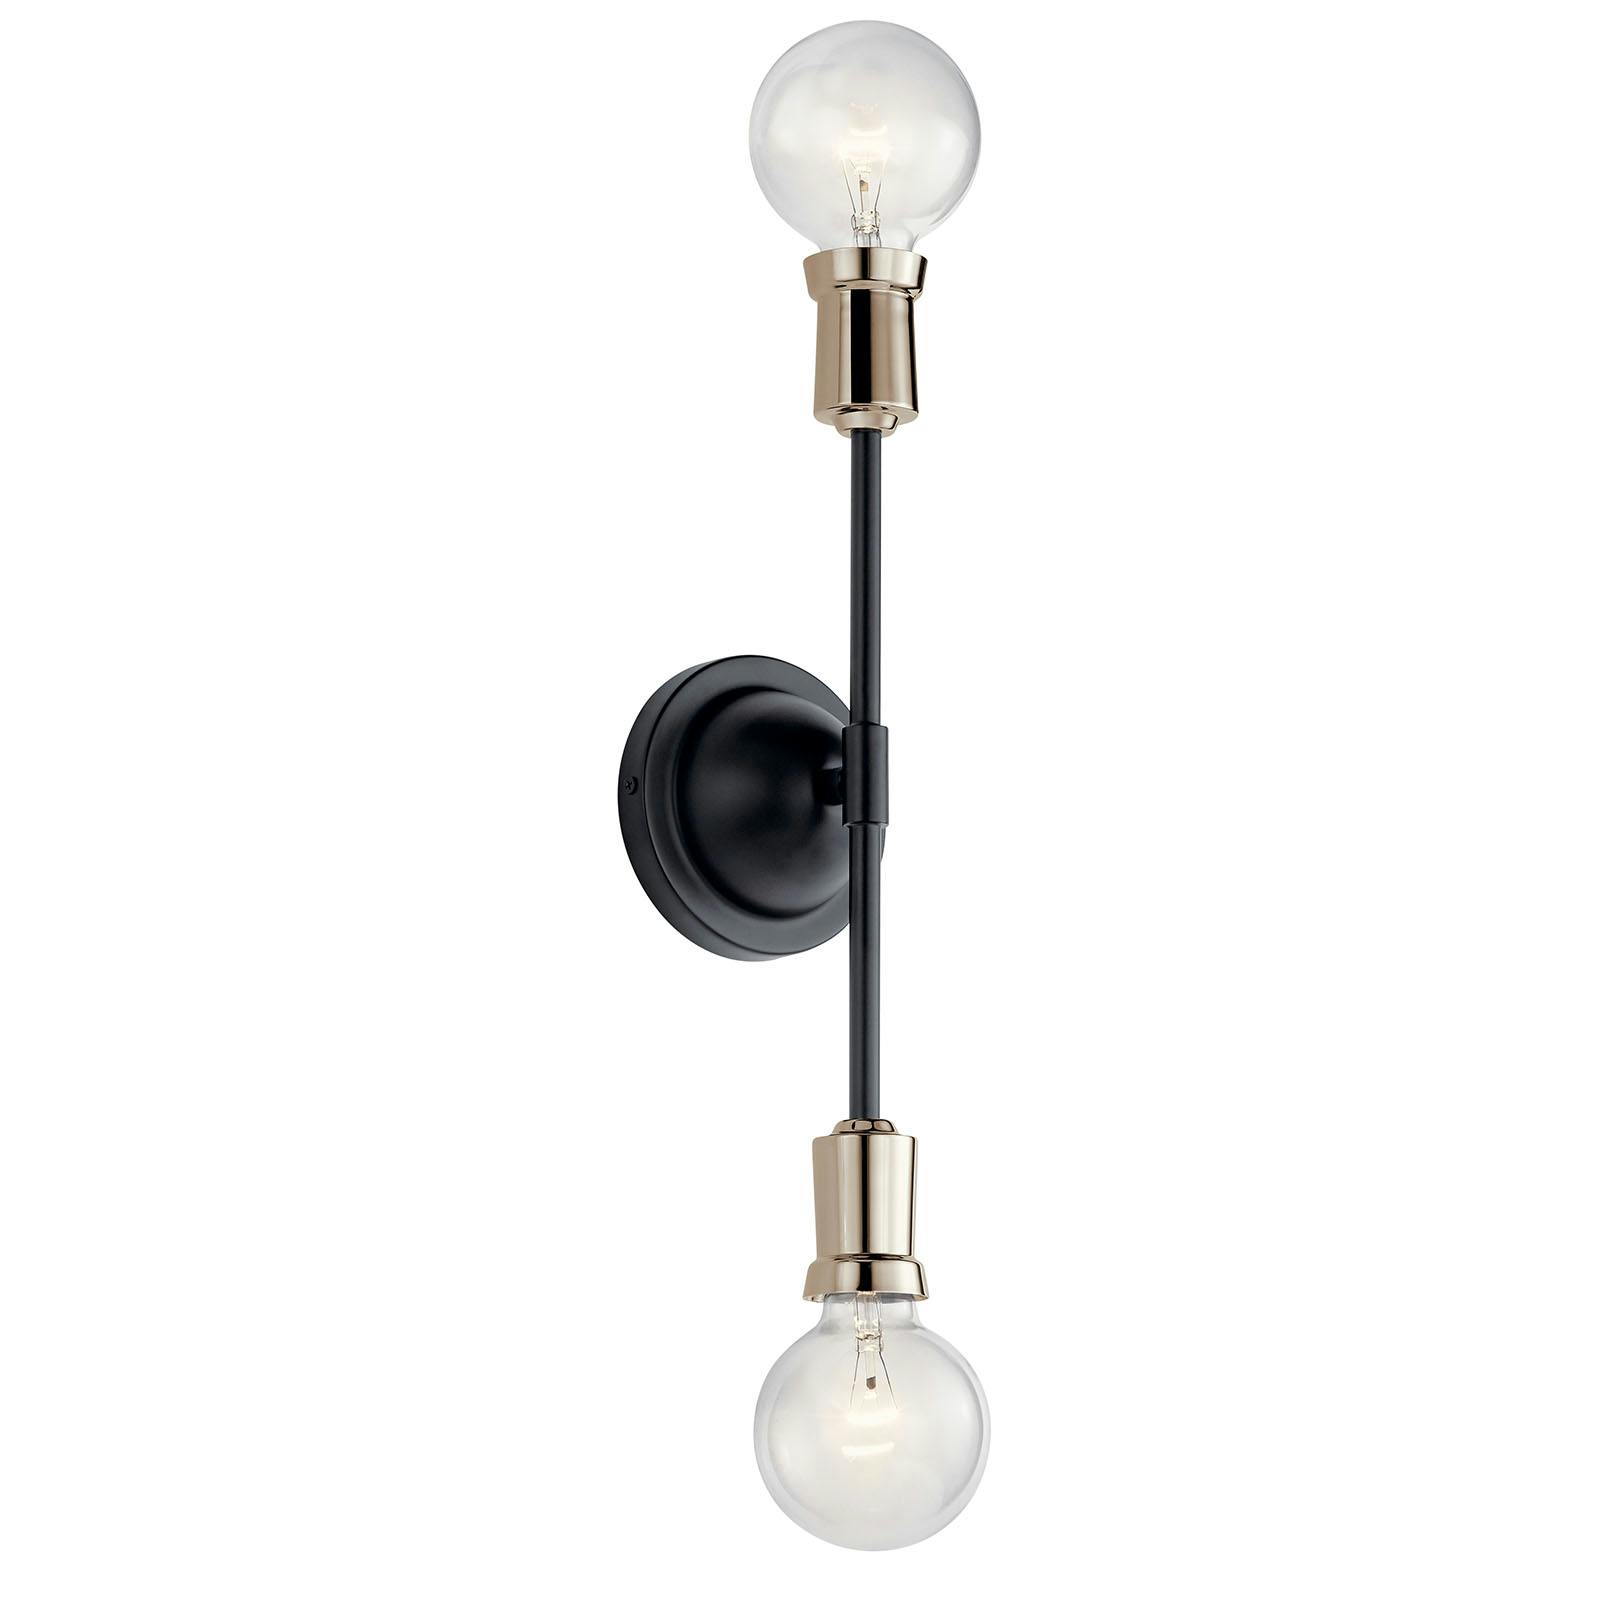 Armstrong Wall Sconce Black Finish on a white background